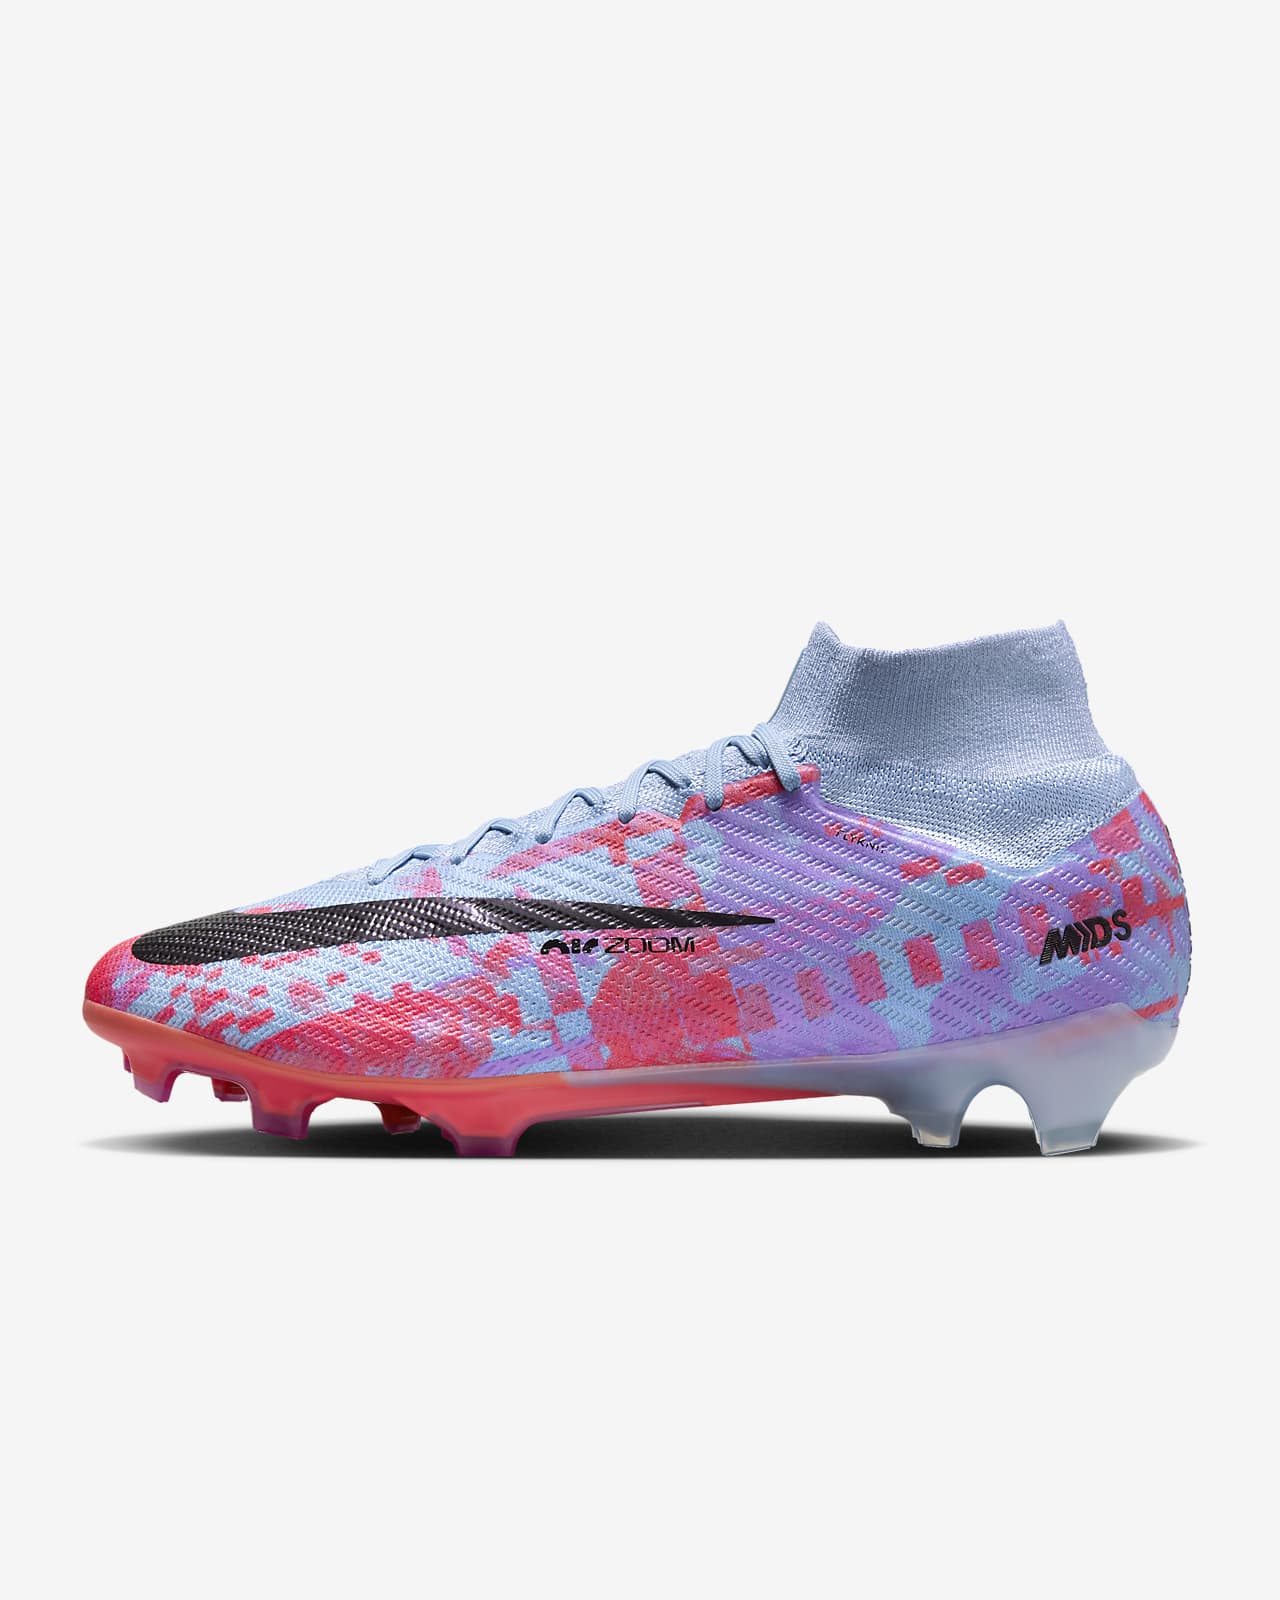 Nike Mercurial Dream Superfly 9 Elite FG Firm-Ground Cleats.